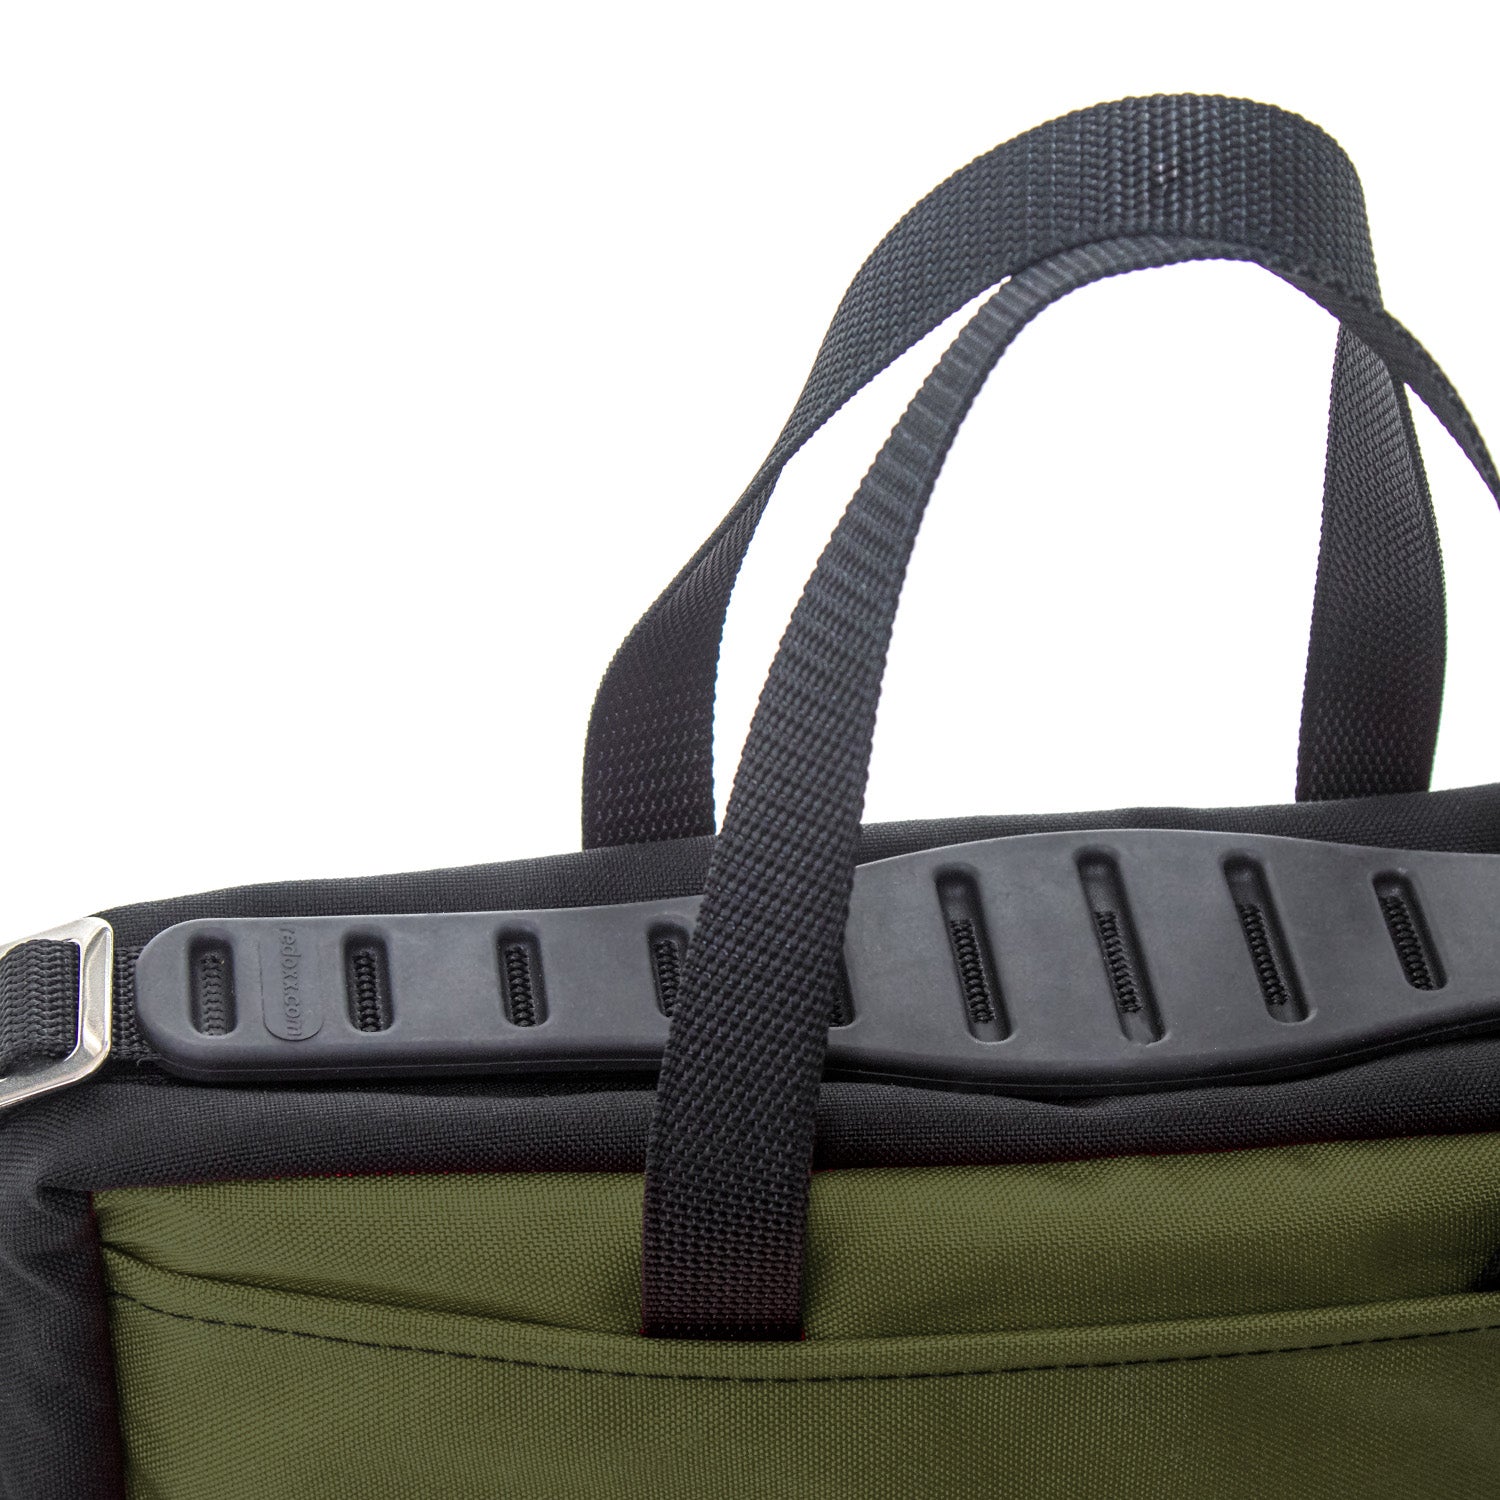 Closeup view of Claw Shoulder strap detail.